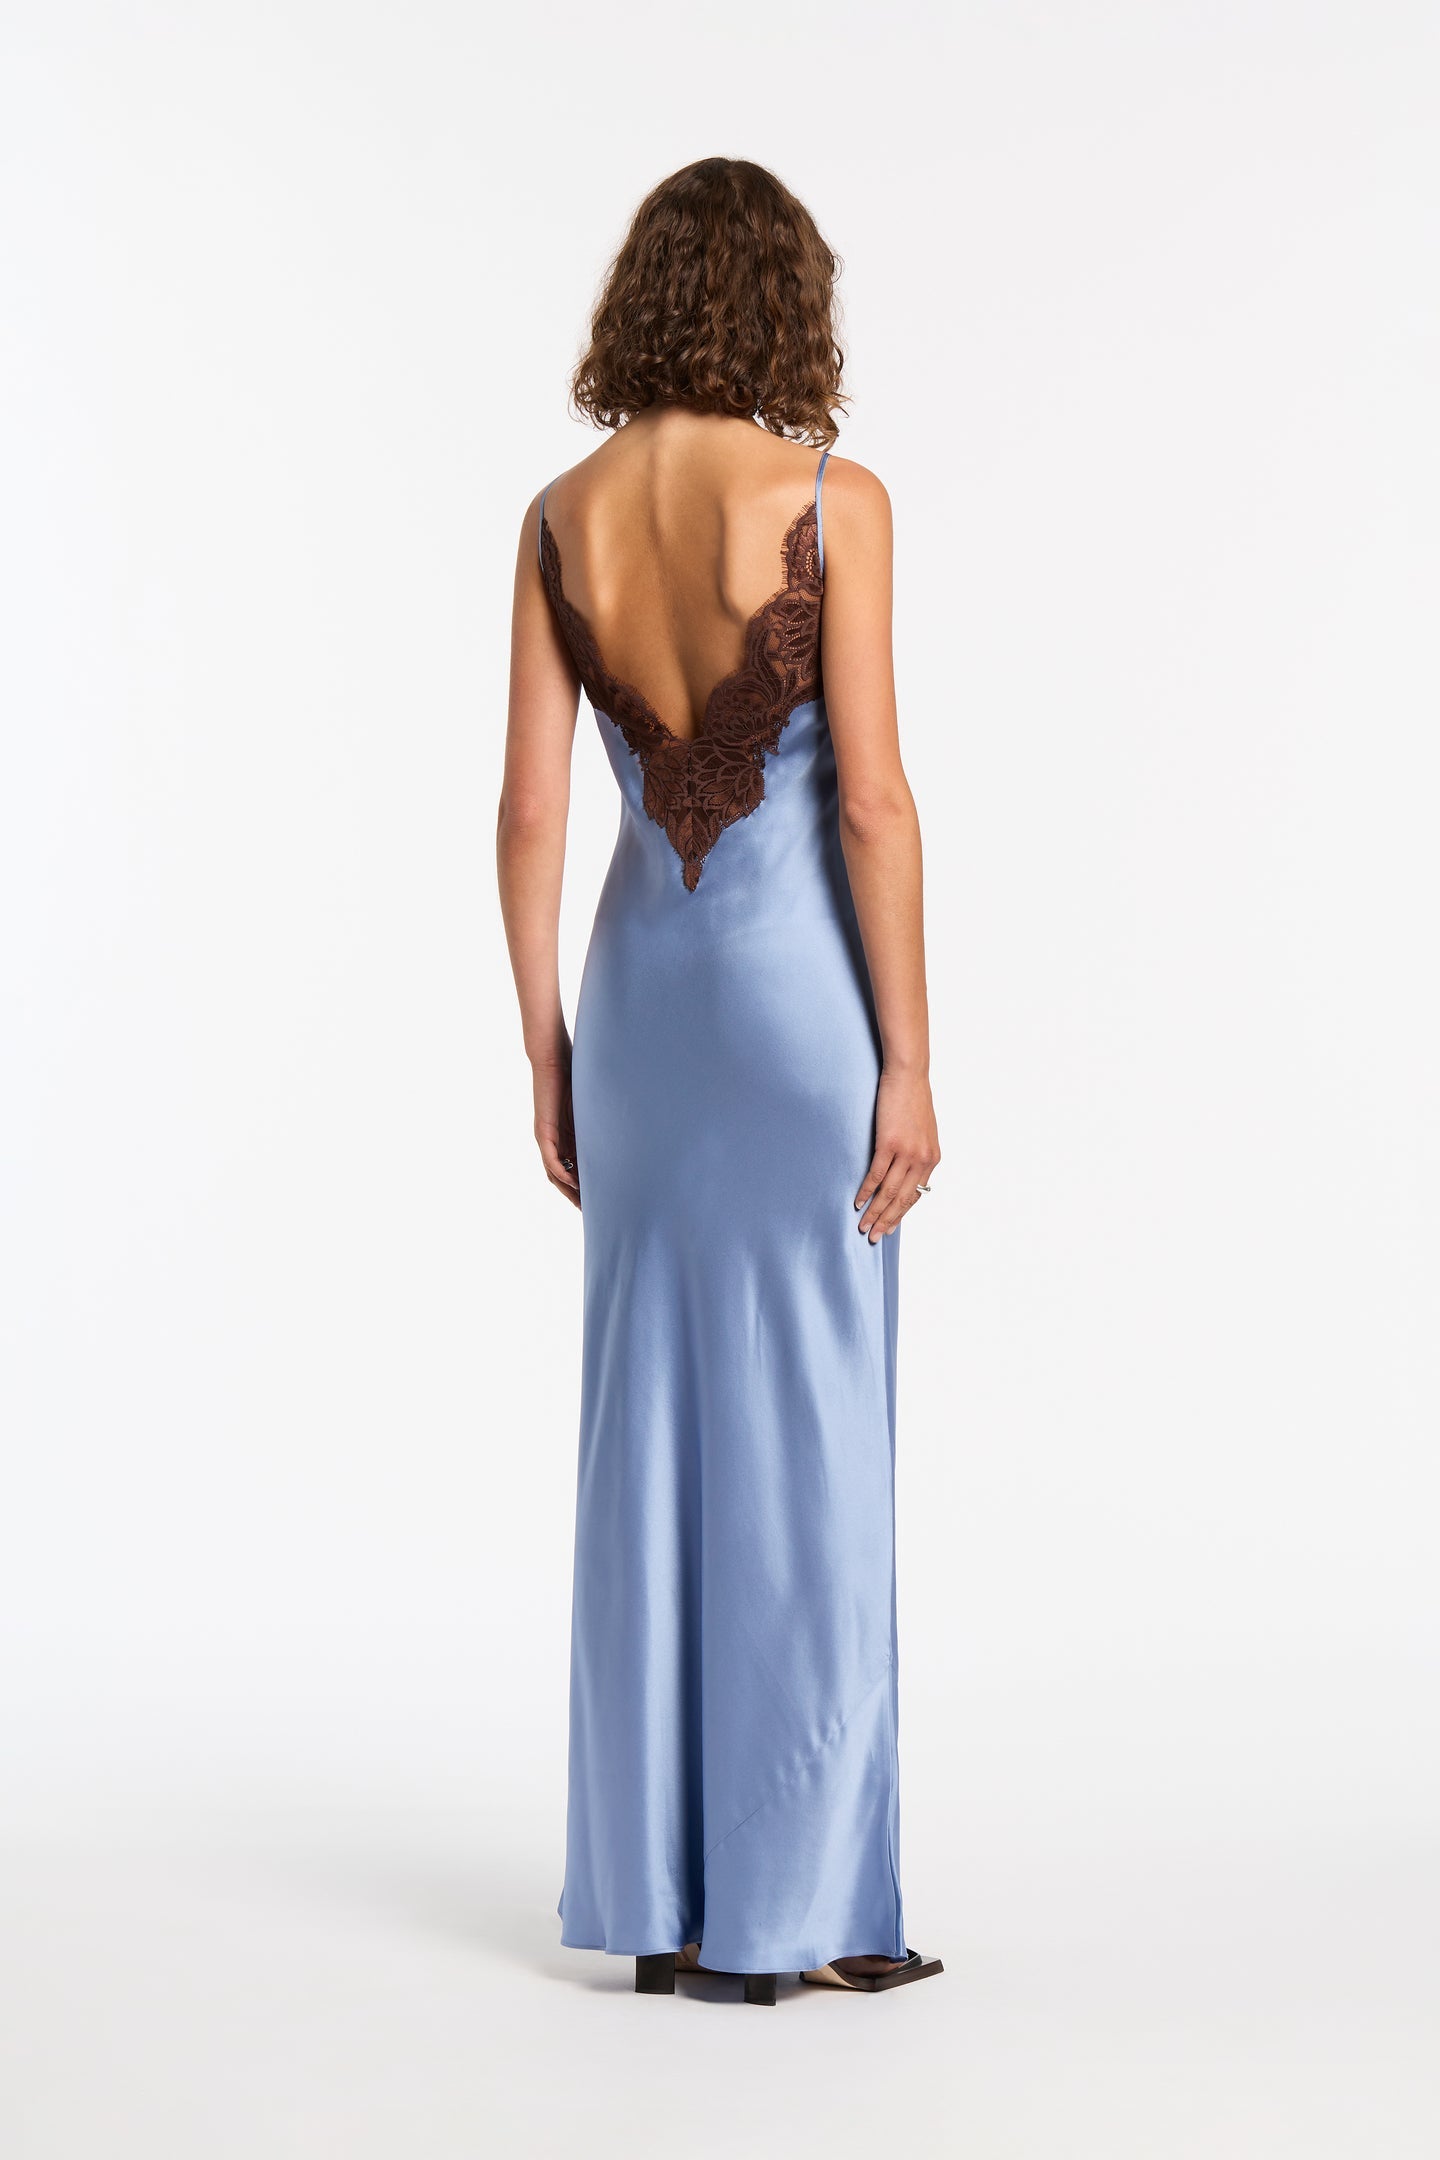 SIR Danseurs Lace Slip Dress in Bleue available at TNT The New Trend Australia.